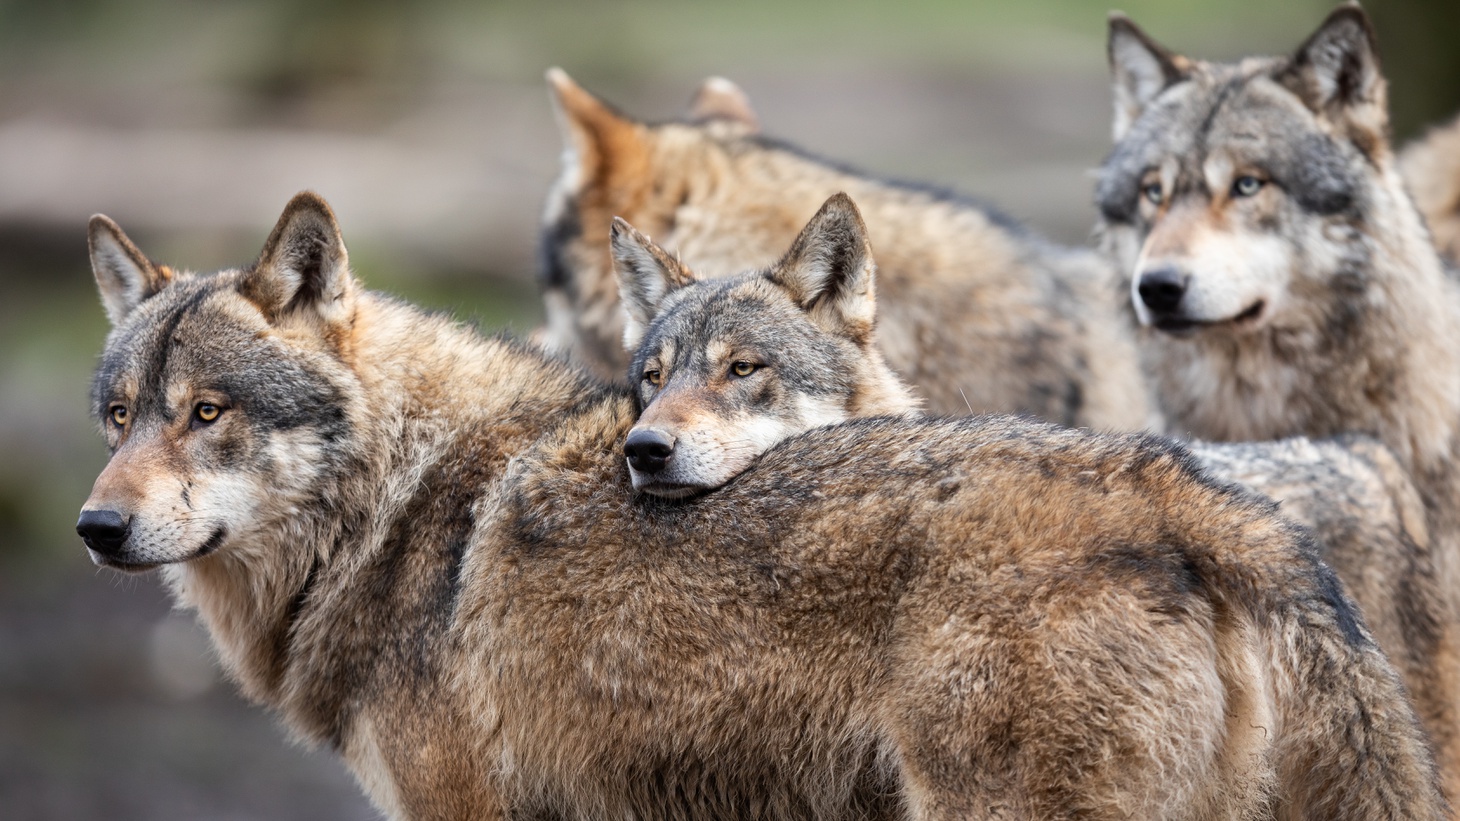 “Wolves are animals that, by nature, live in … family groups,” says naturalist Carl Safina. “They hunt together cooperatively, but what they hunt and how they hunt can differ a lot from region to region. And it can even differ a lot from family to family in the same place.”